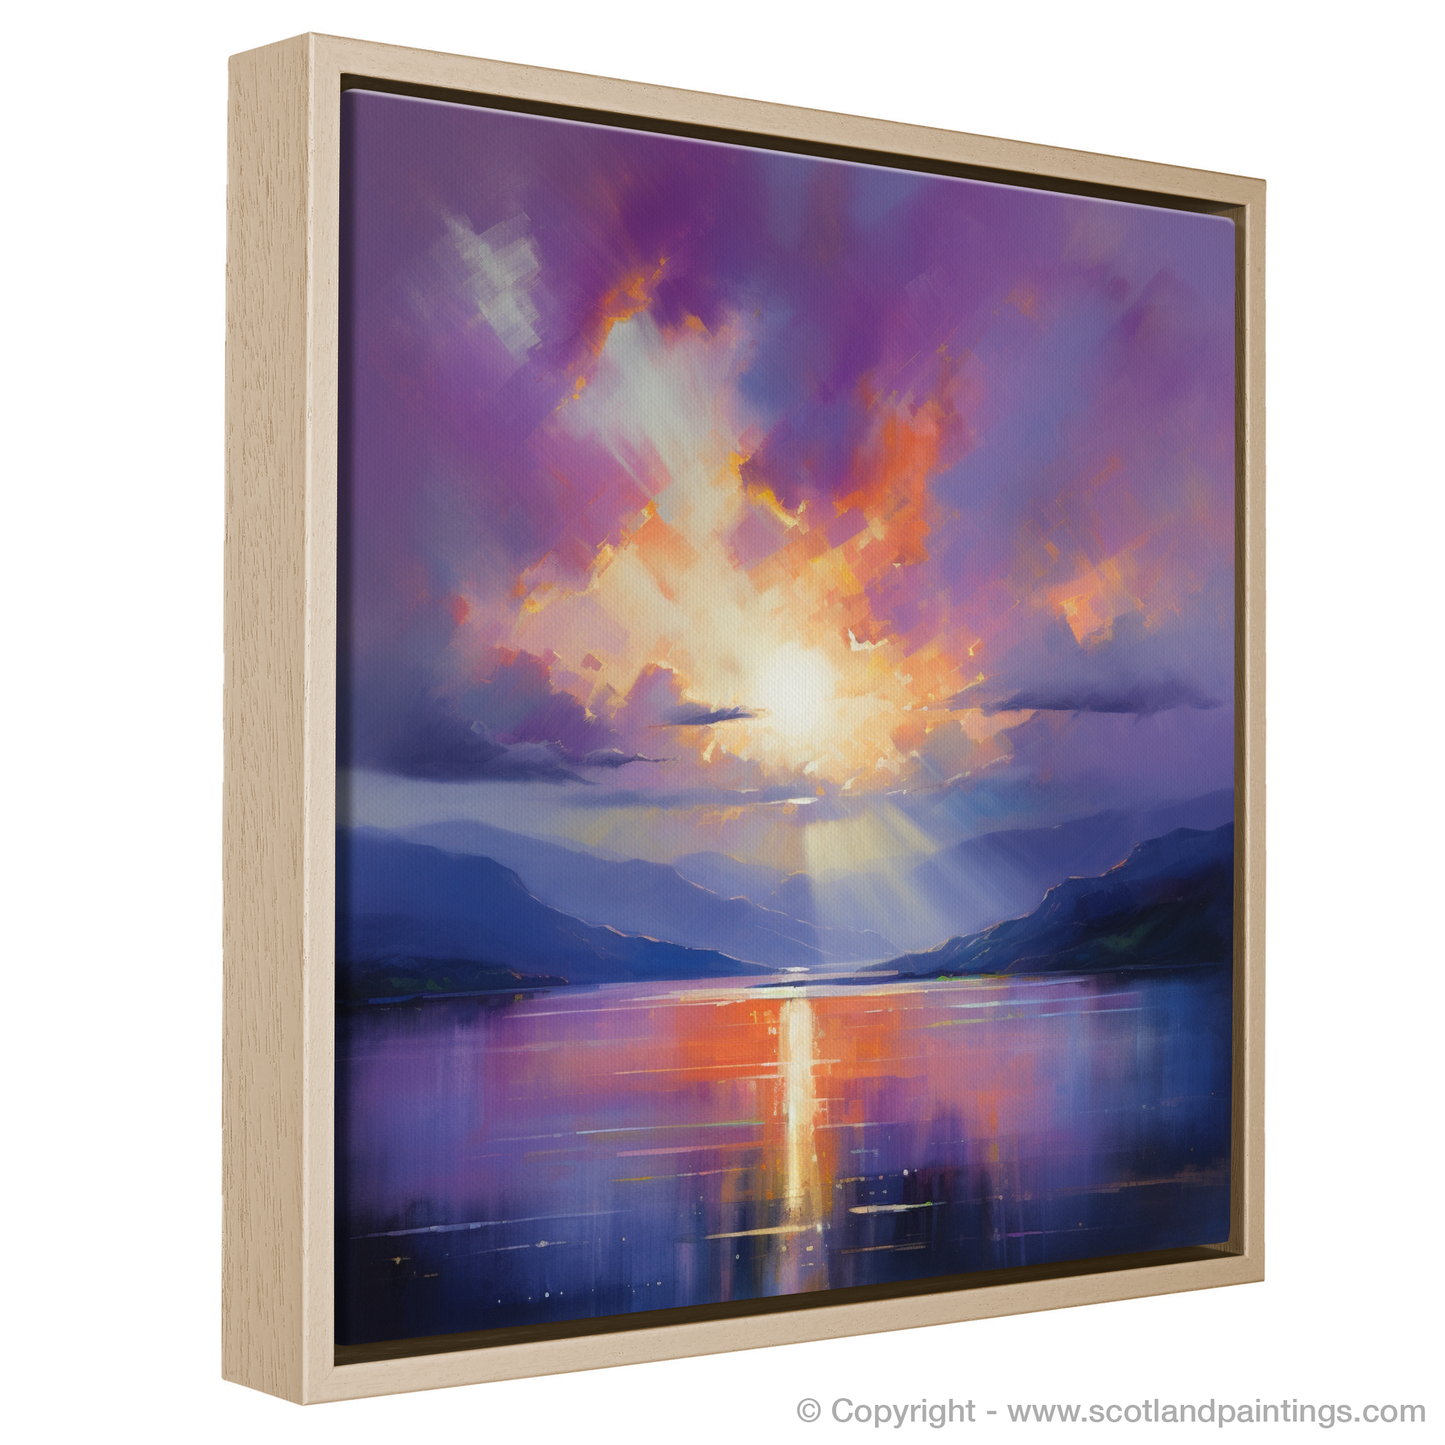 Painting and Art Print of Crepuscular rays above Loch Lomond entitled "Crepuscular Radiance over Loch Lomond".